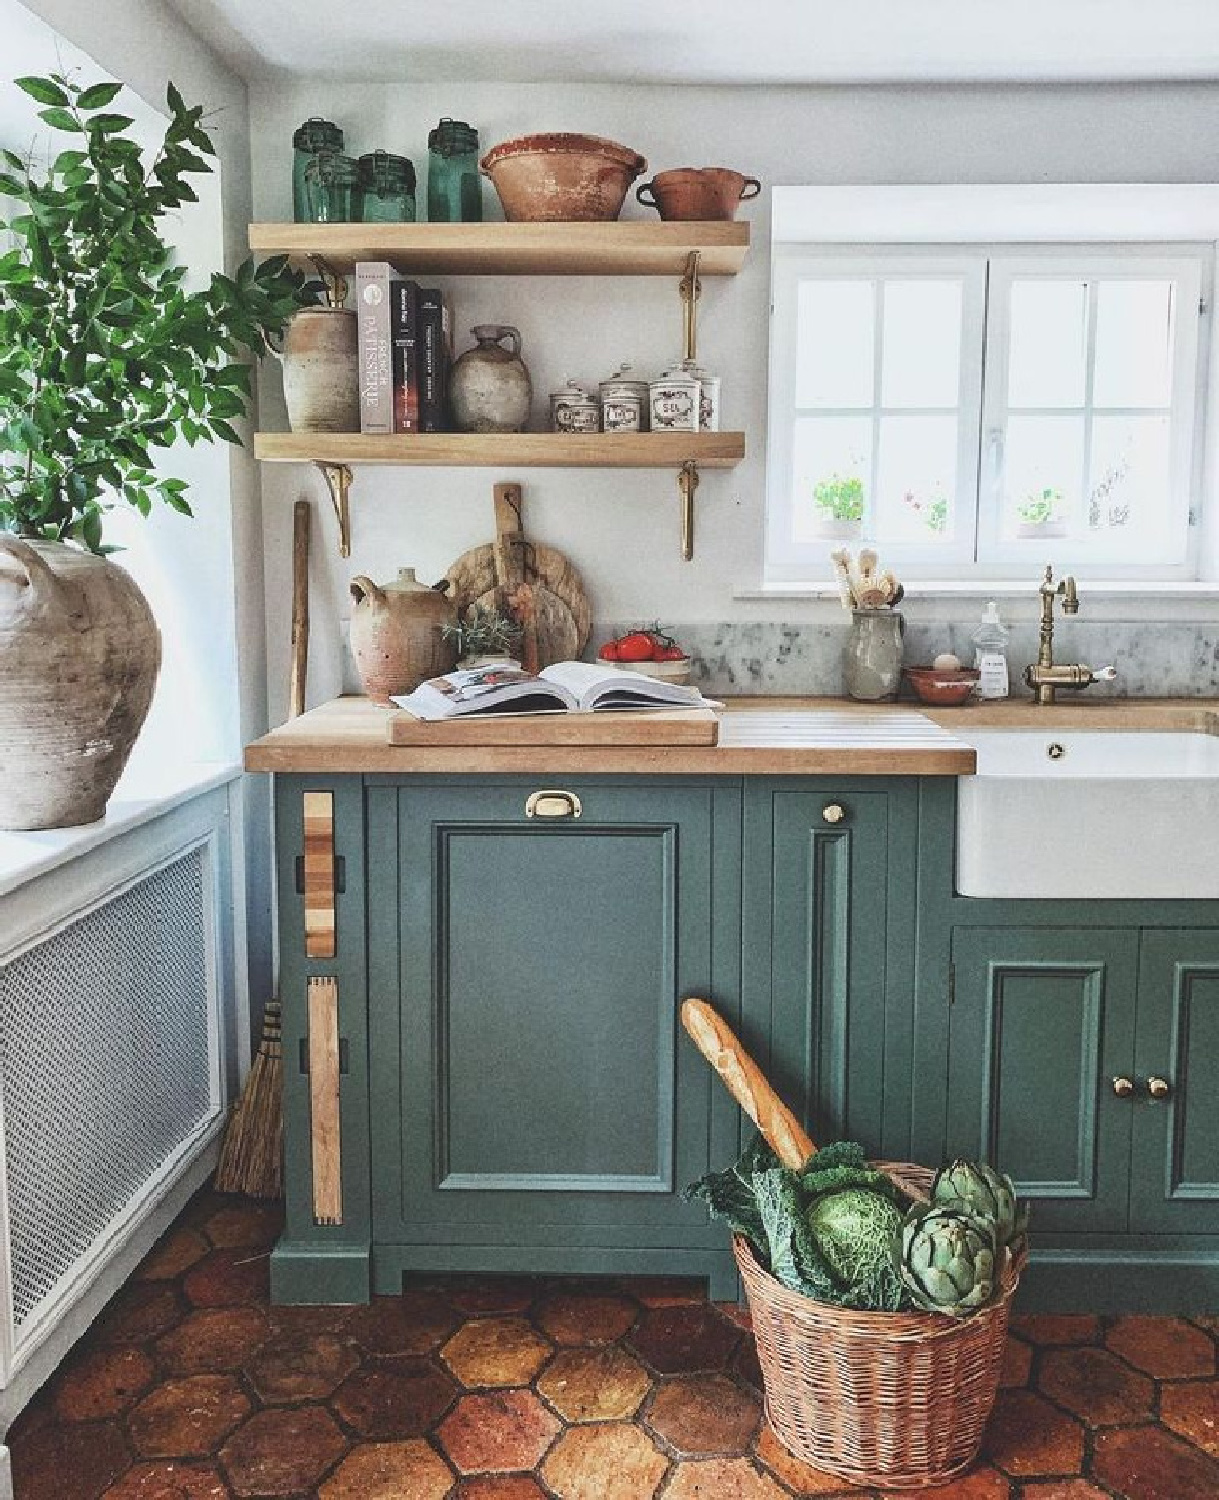 Charming rustic French farmhouse kitchen with green painted cabinets (Farrow & Ball Green Smoke), floating shelves, farm sink, and collected antique pots and baskets - Vivi et Margot. #frenchfarmhouse #rustickitchens #farmhousekitchen #greenkitchens #frenchcountry #kitcheninfrance #oldworldstyle